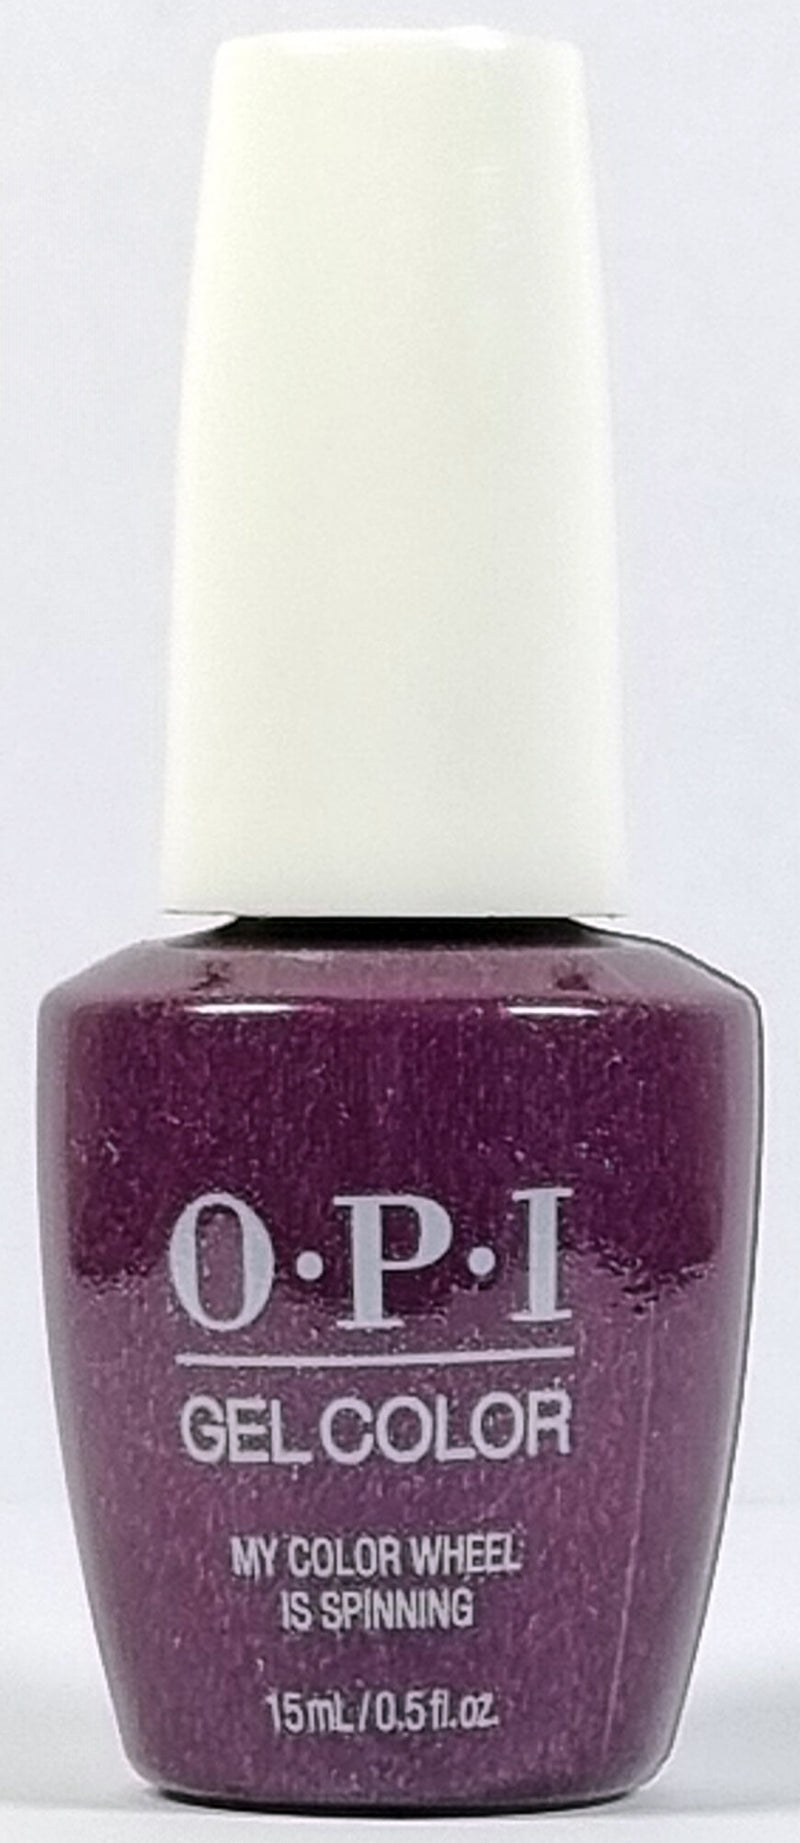 My Color Wheel is Spinning * OPI Gelcolor